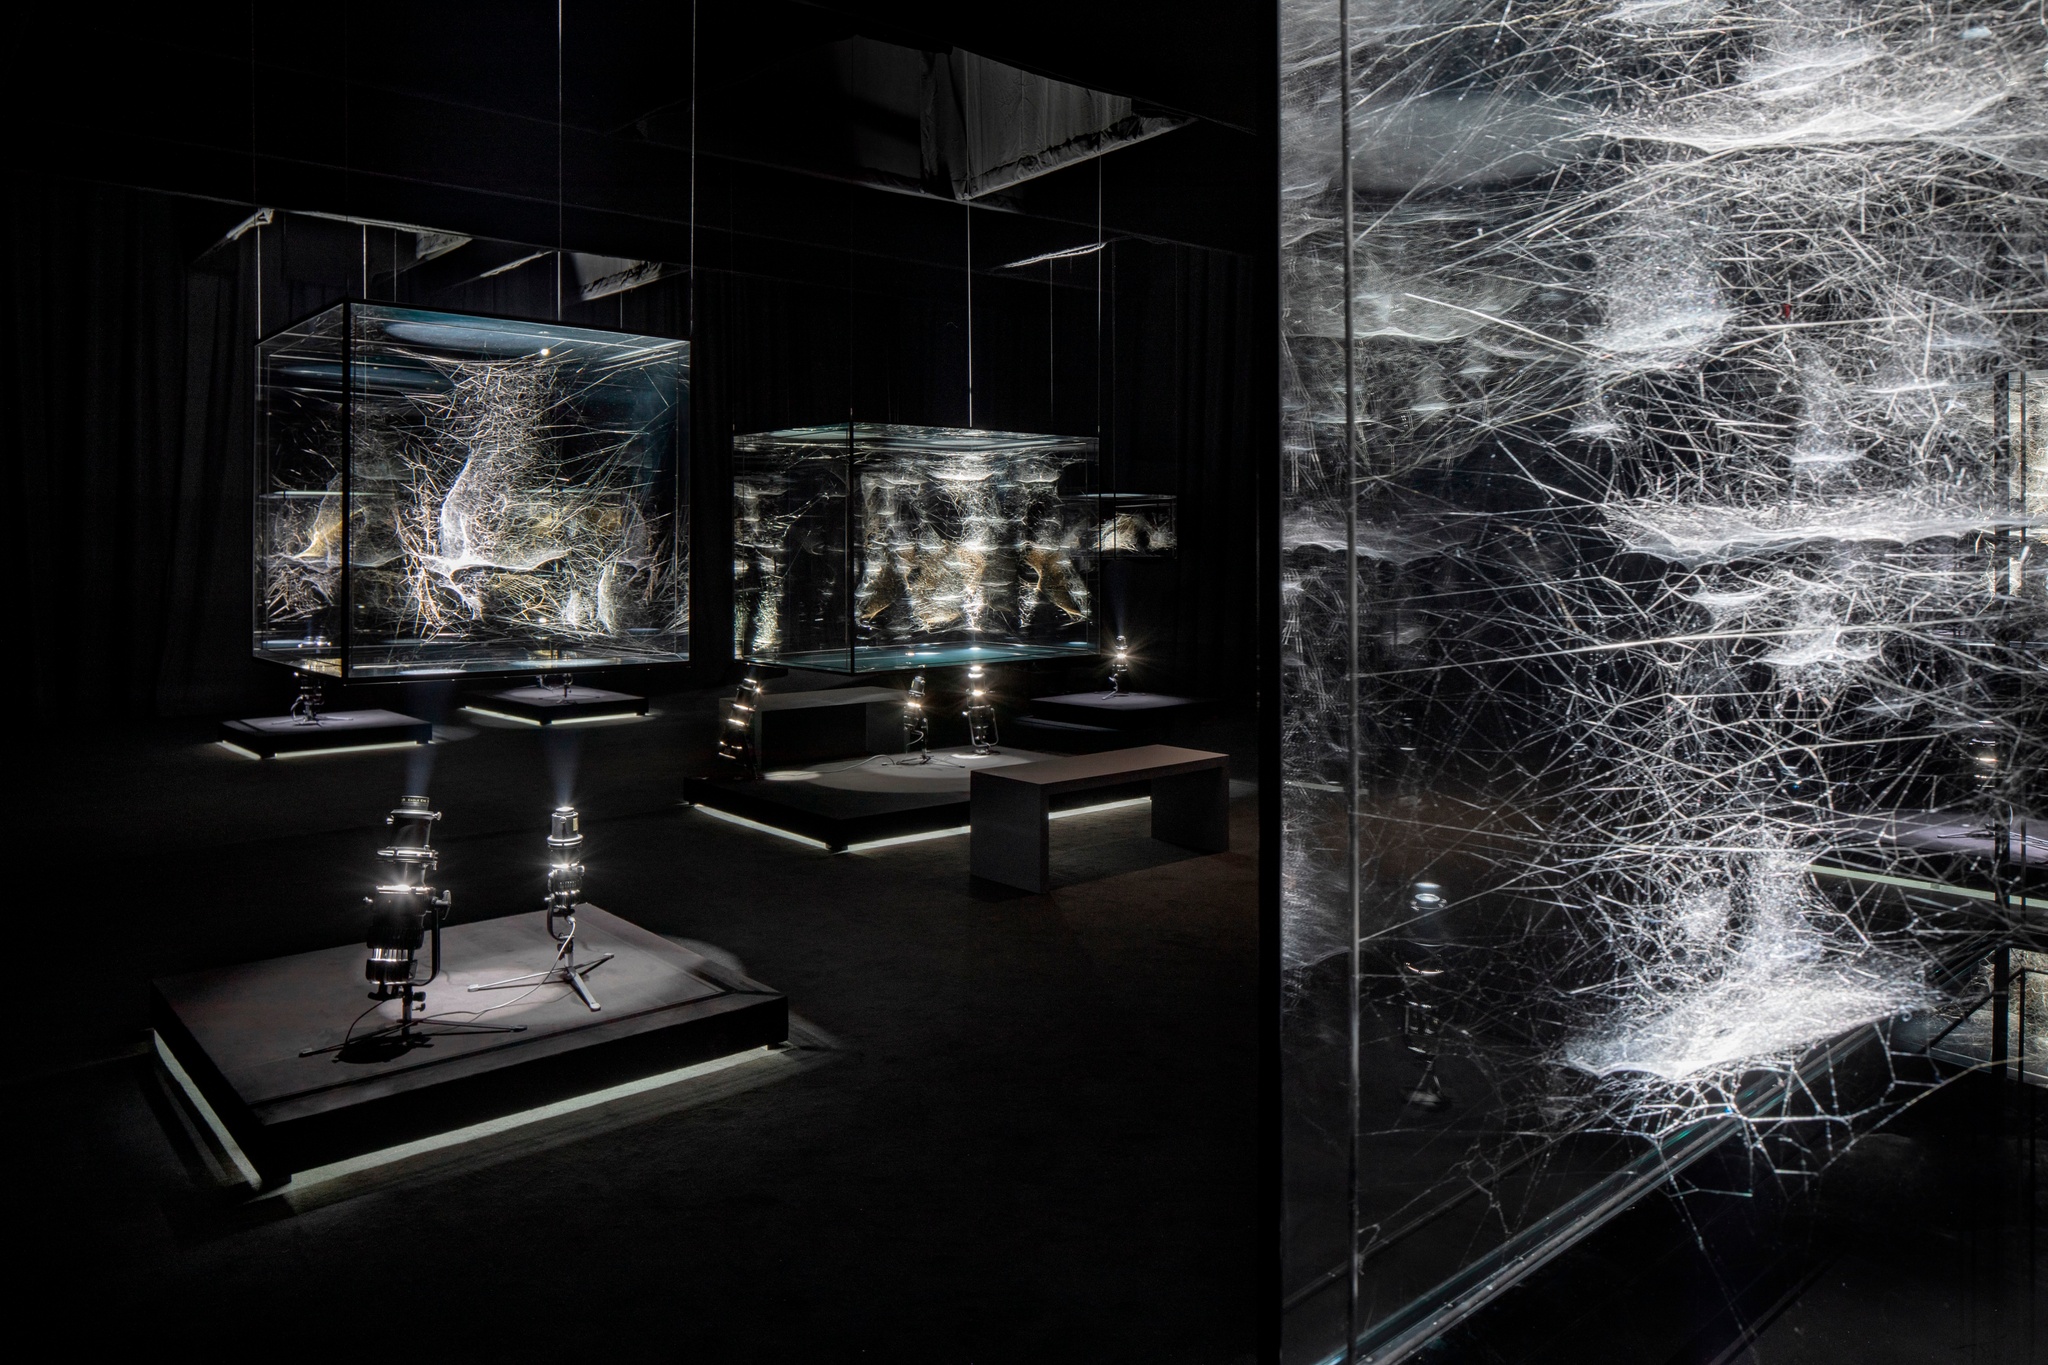 Three complex spiderwebs are dramatically lit in cubic glass containers that resemble aquariums